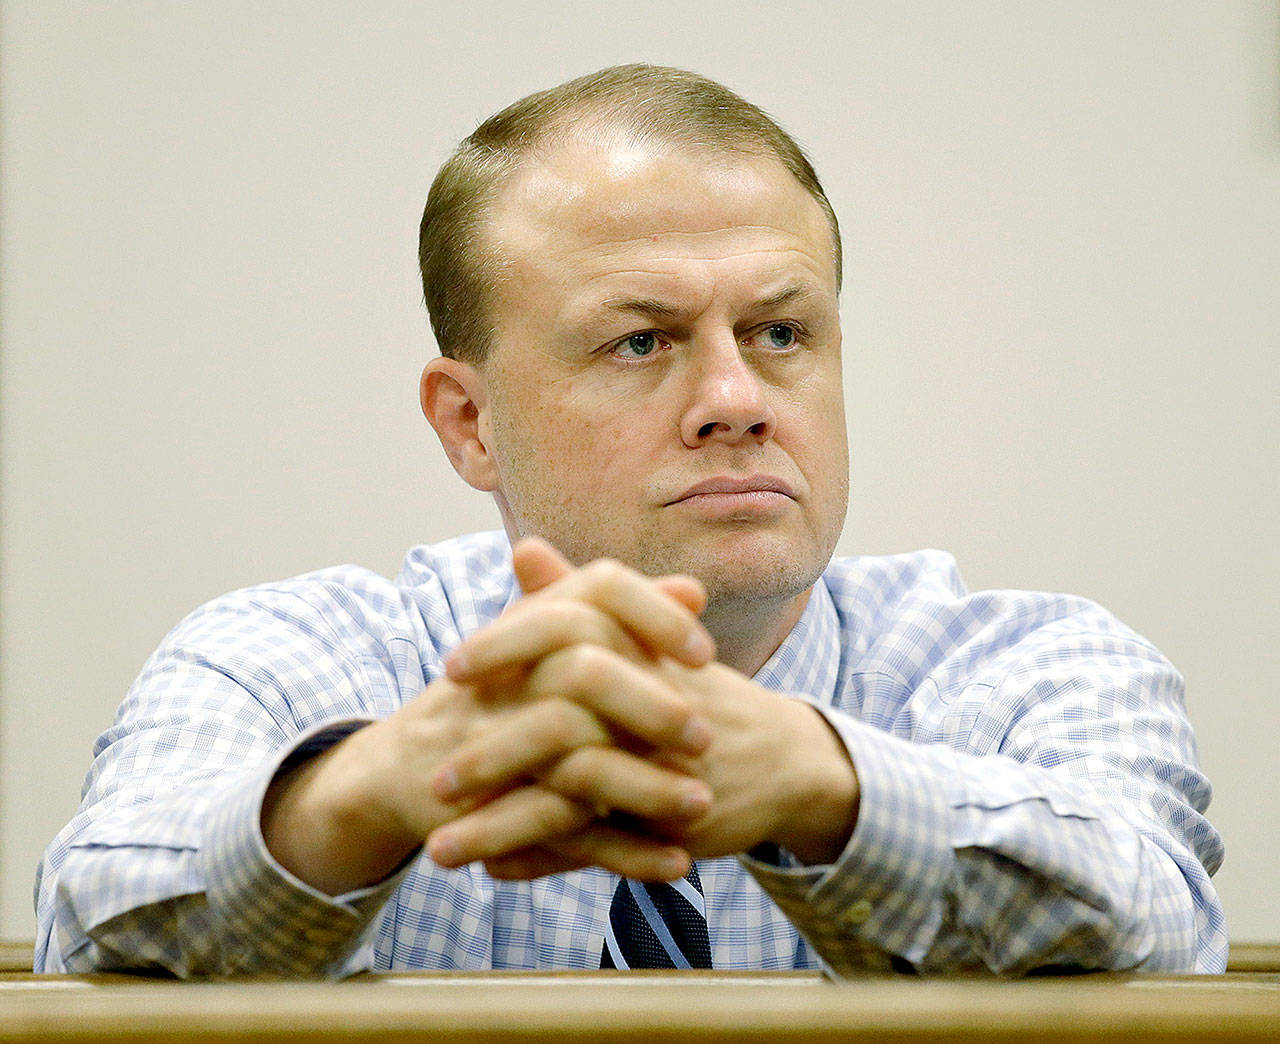 Tim Eyman during a court hearing about the legality of an anti-tax measure, in King County Superior Court in Seattle on Jan. 19, 2016. (Elaine Thompson / AP file)